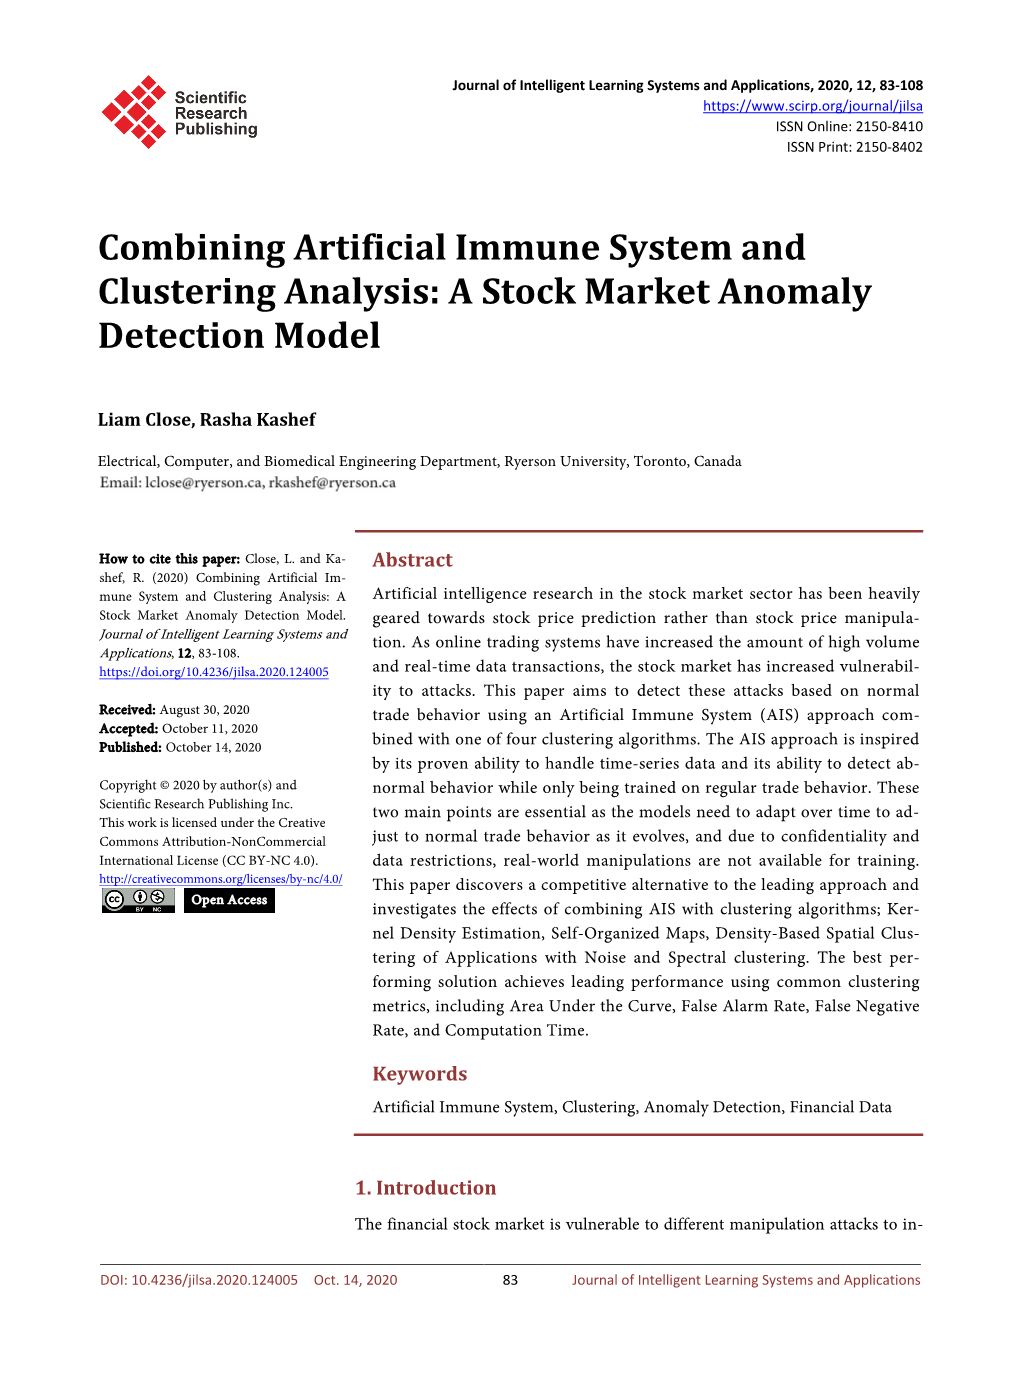 Combining Artificial Immune System and Clustering Analysis: a Stock Market Anomaly Detection Model